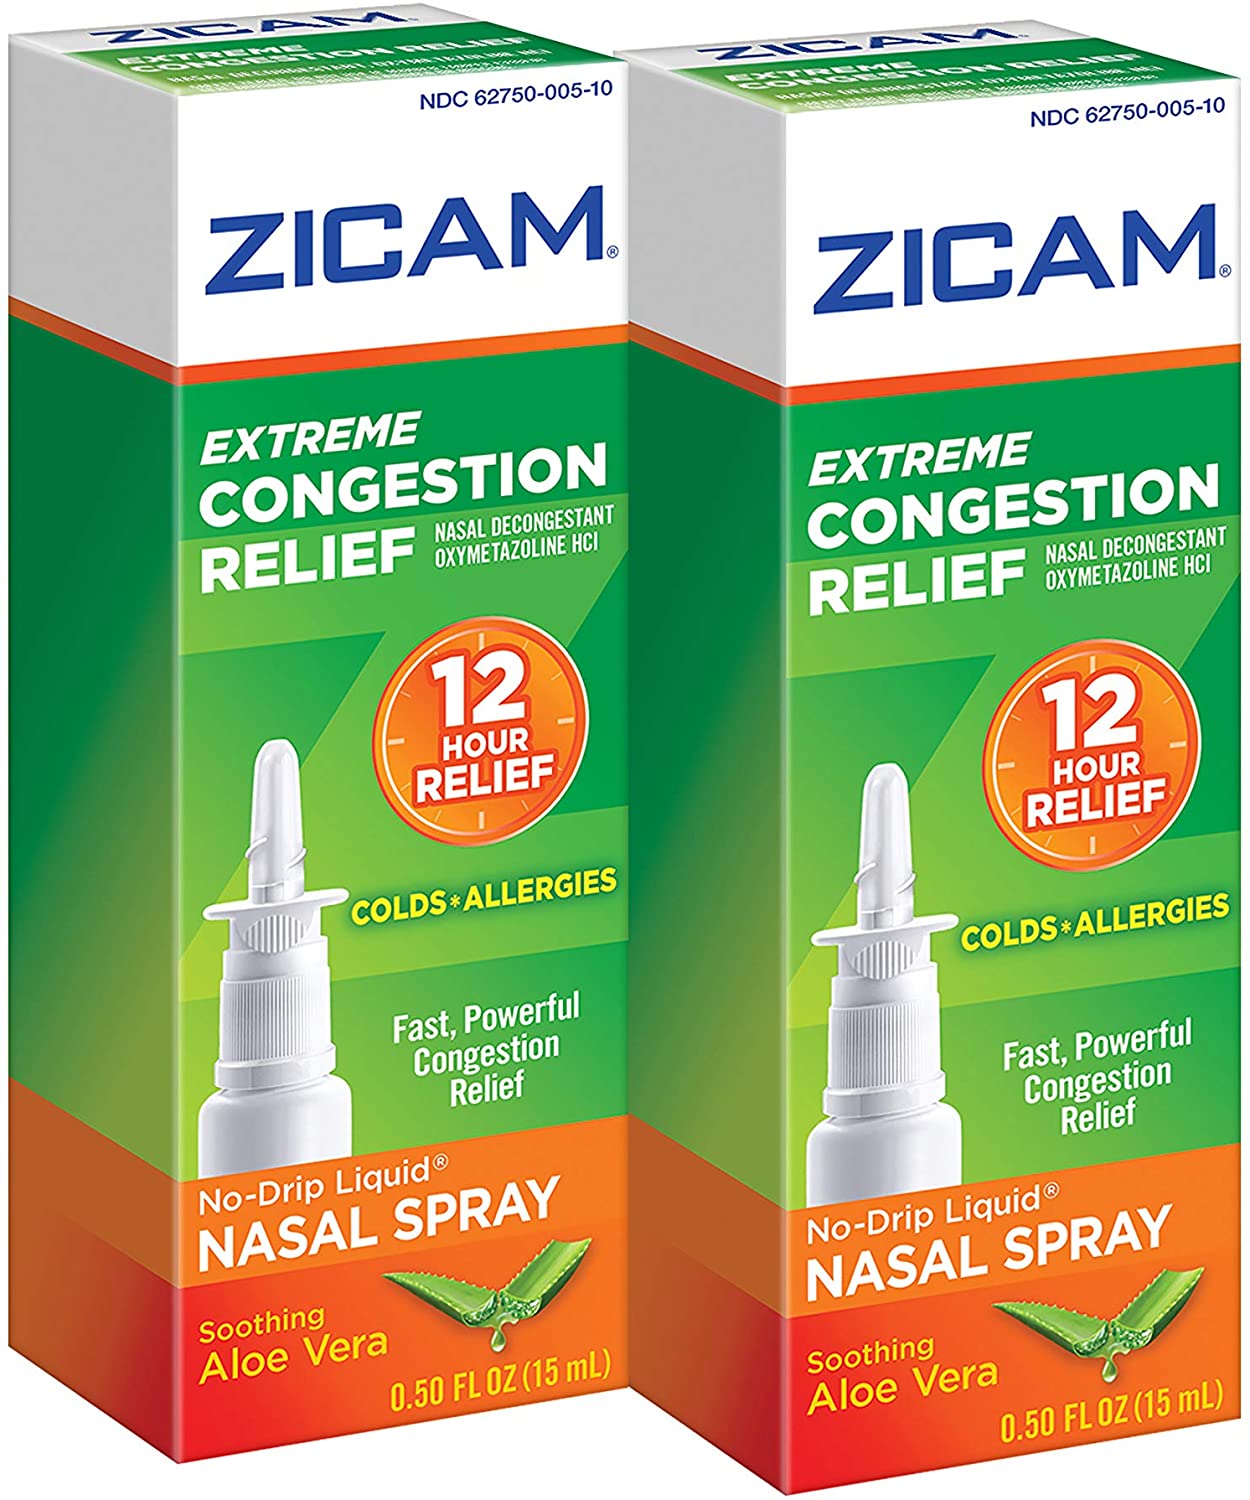 Amazon.com: Zicam Extreme Congestion Relief No-Drip Liquid Nasal Spray with Soothing Aloe Vera, 0.5 Ounce (Pack of 2) - in stock soon $9.47